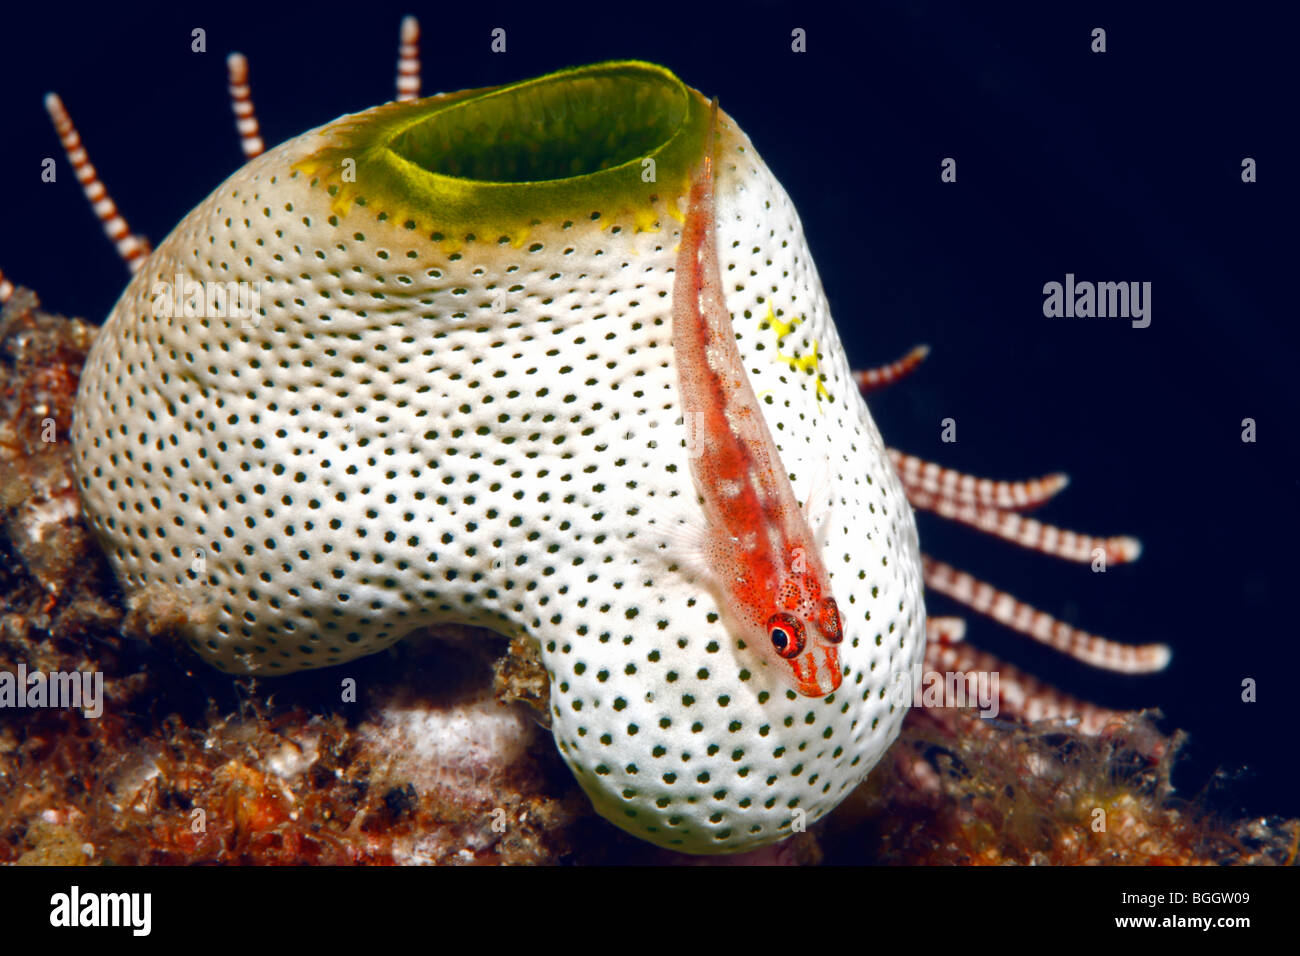 Many Host Goby, or Common Ghost Goby, Pleurosicya mossambica, on an Ascidian, Atriolum robustum. Stock Photo